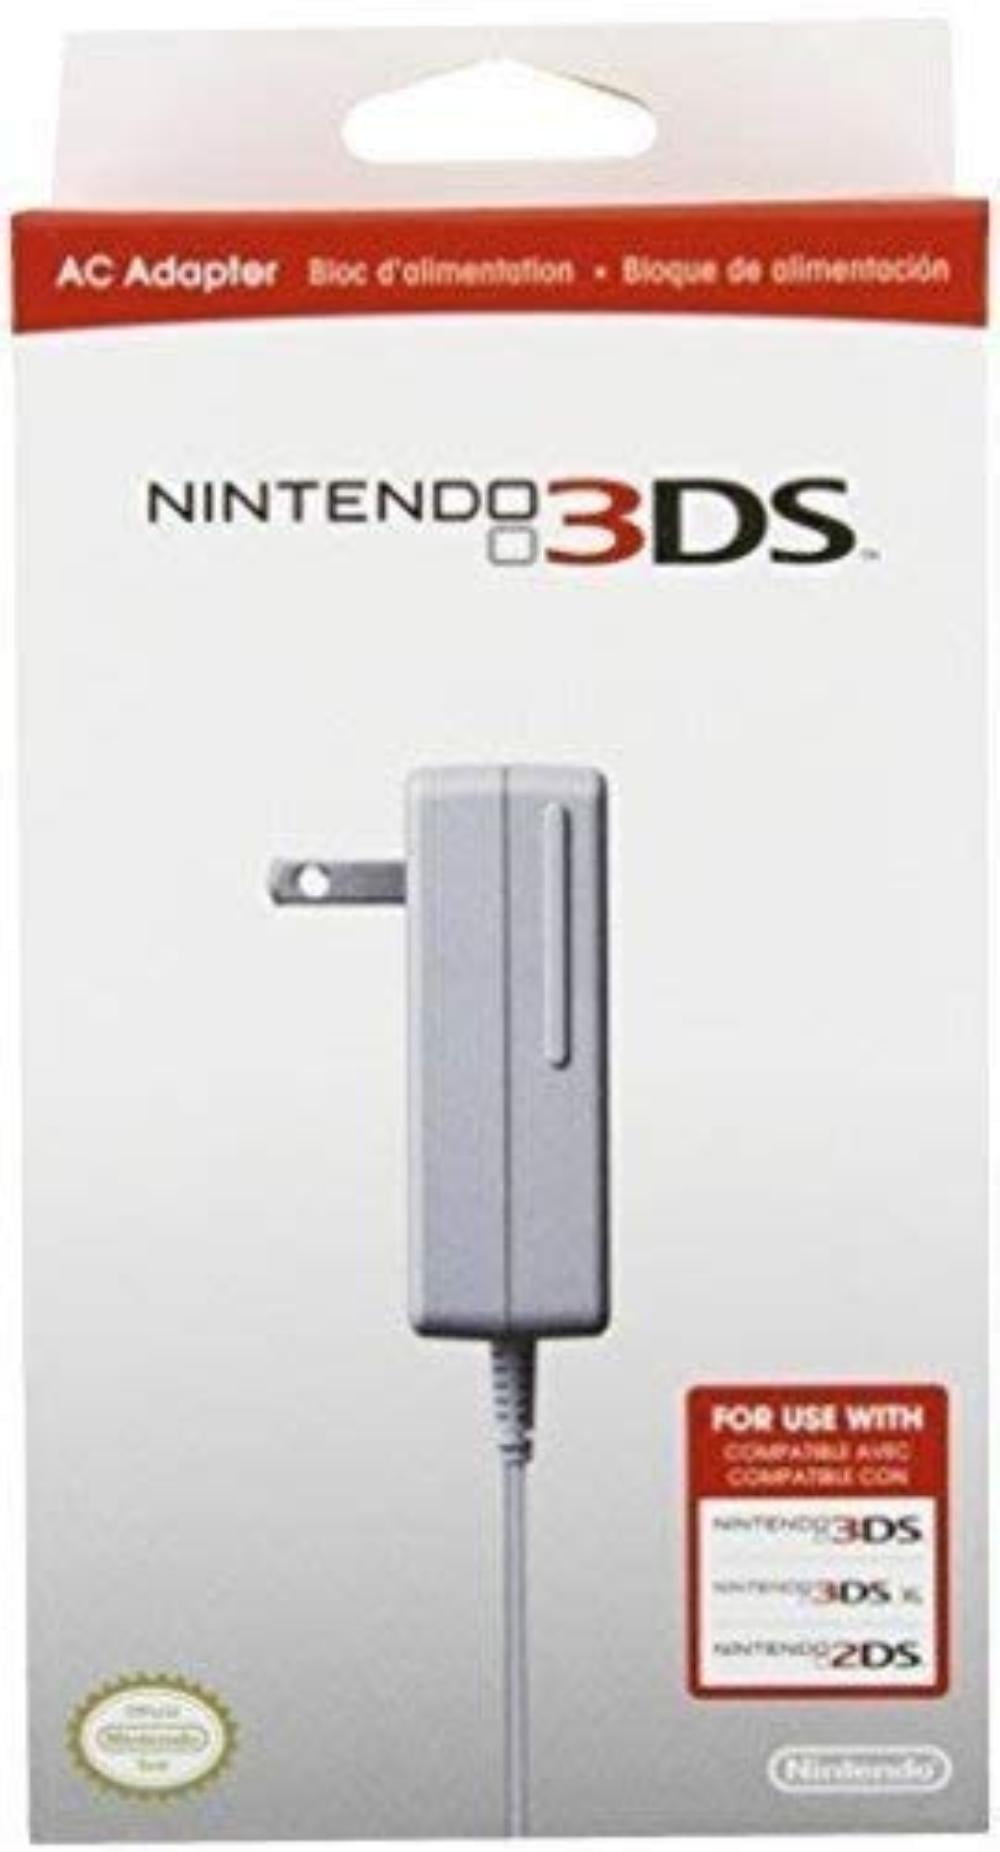 Nintendo 3DS Compatible with 3DS / 3DS XL / 2DS AC Adapter, Power your  Nintendo 3DS family system from any 120-volt outlet By by Nintendo